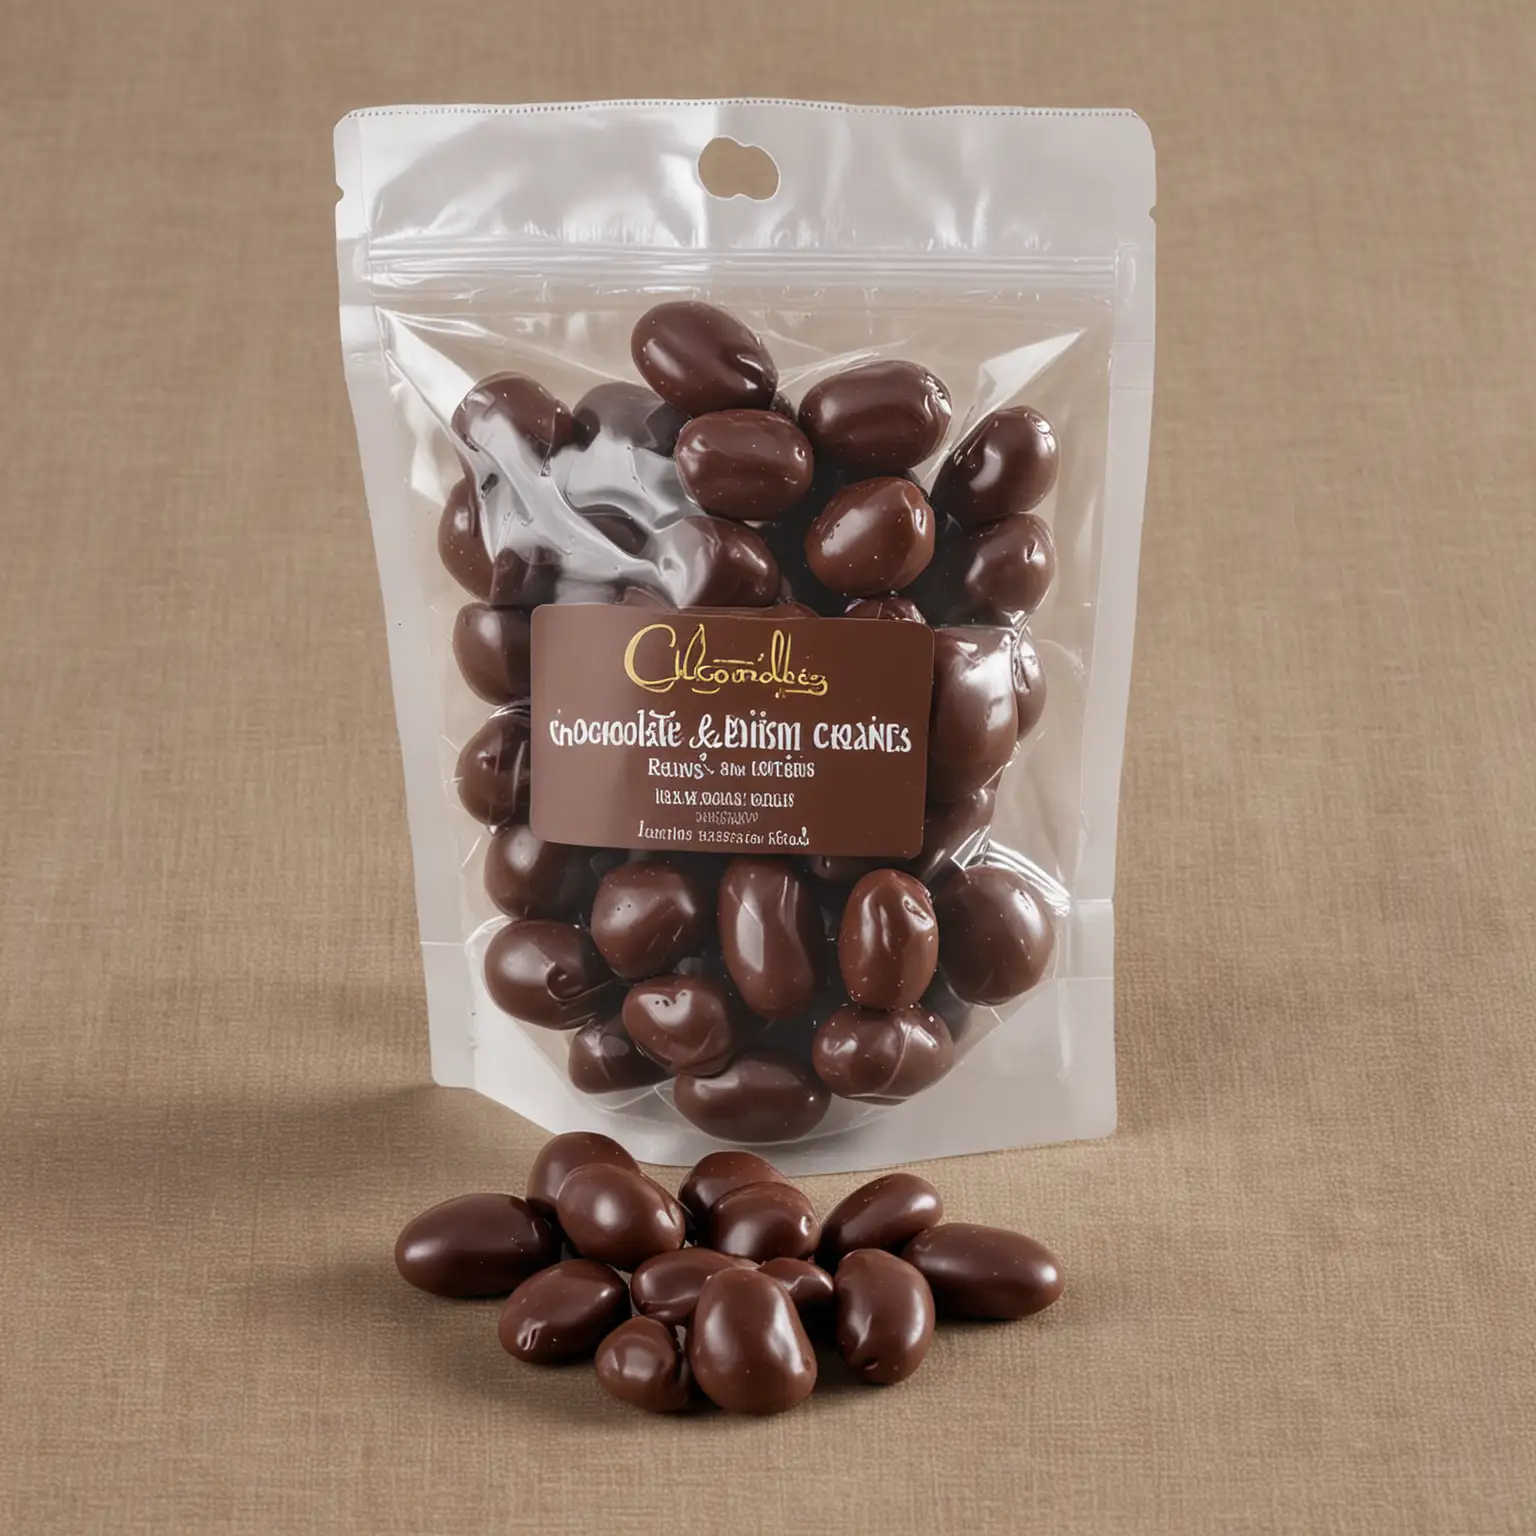 Delicious Chocolate Covered Raisins on a Petite Platter